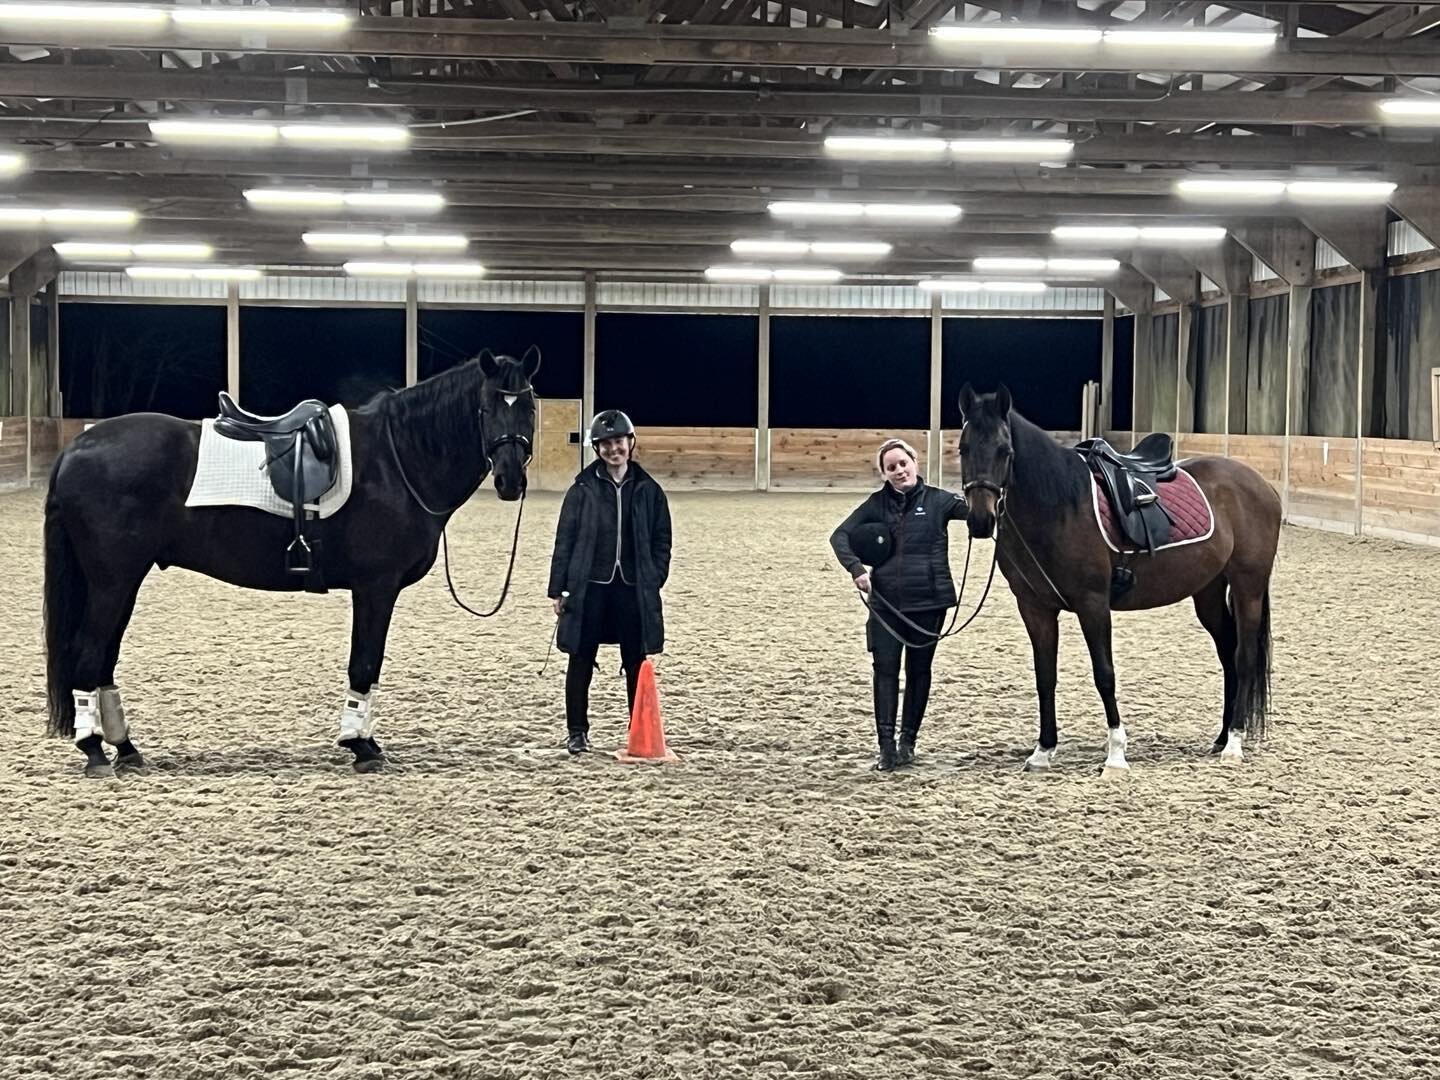 What do you do after you take a big fat test on a Monday? You come and destress with your horse and friends! #WineAndRide.  Keihanna, Mandy, and Justine (not pictured!)